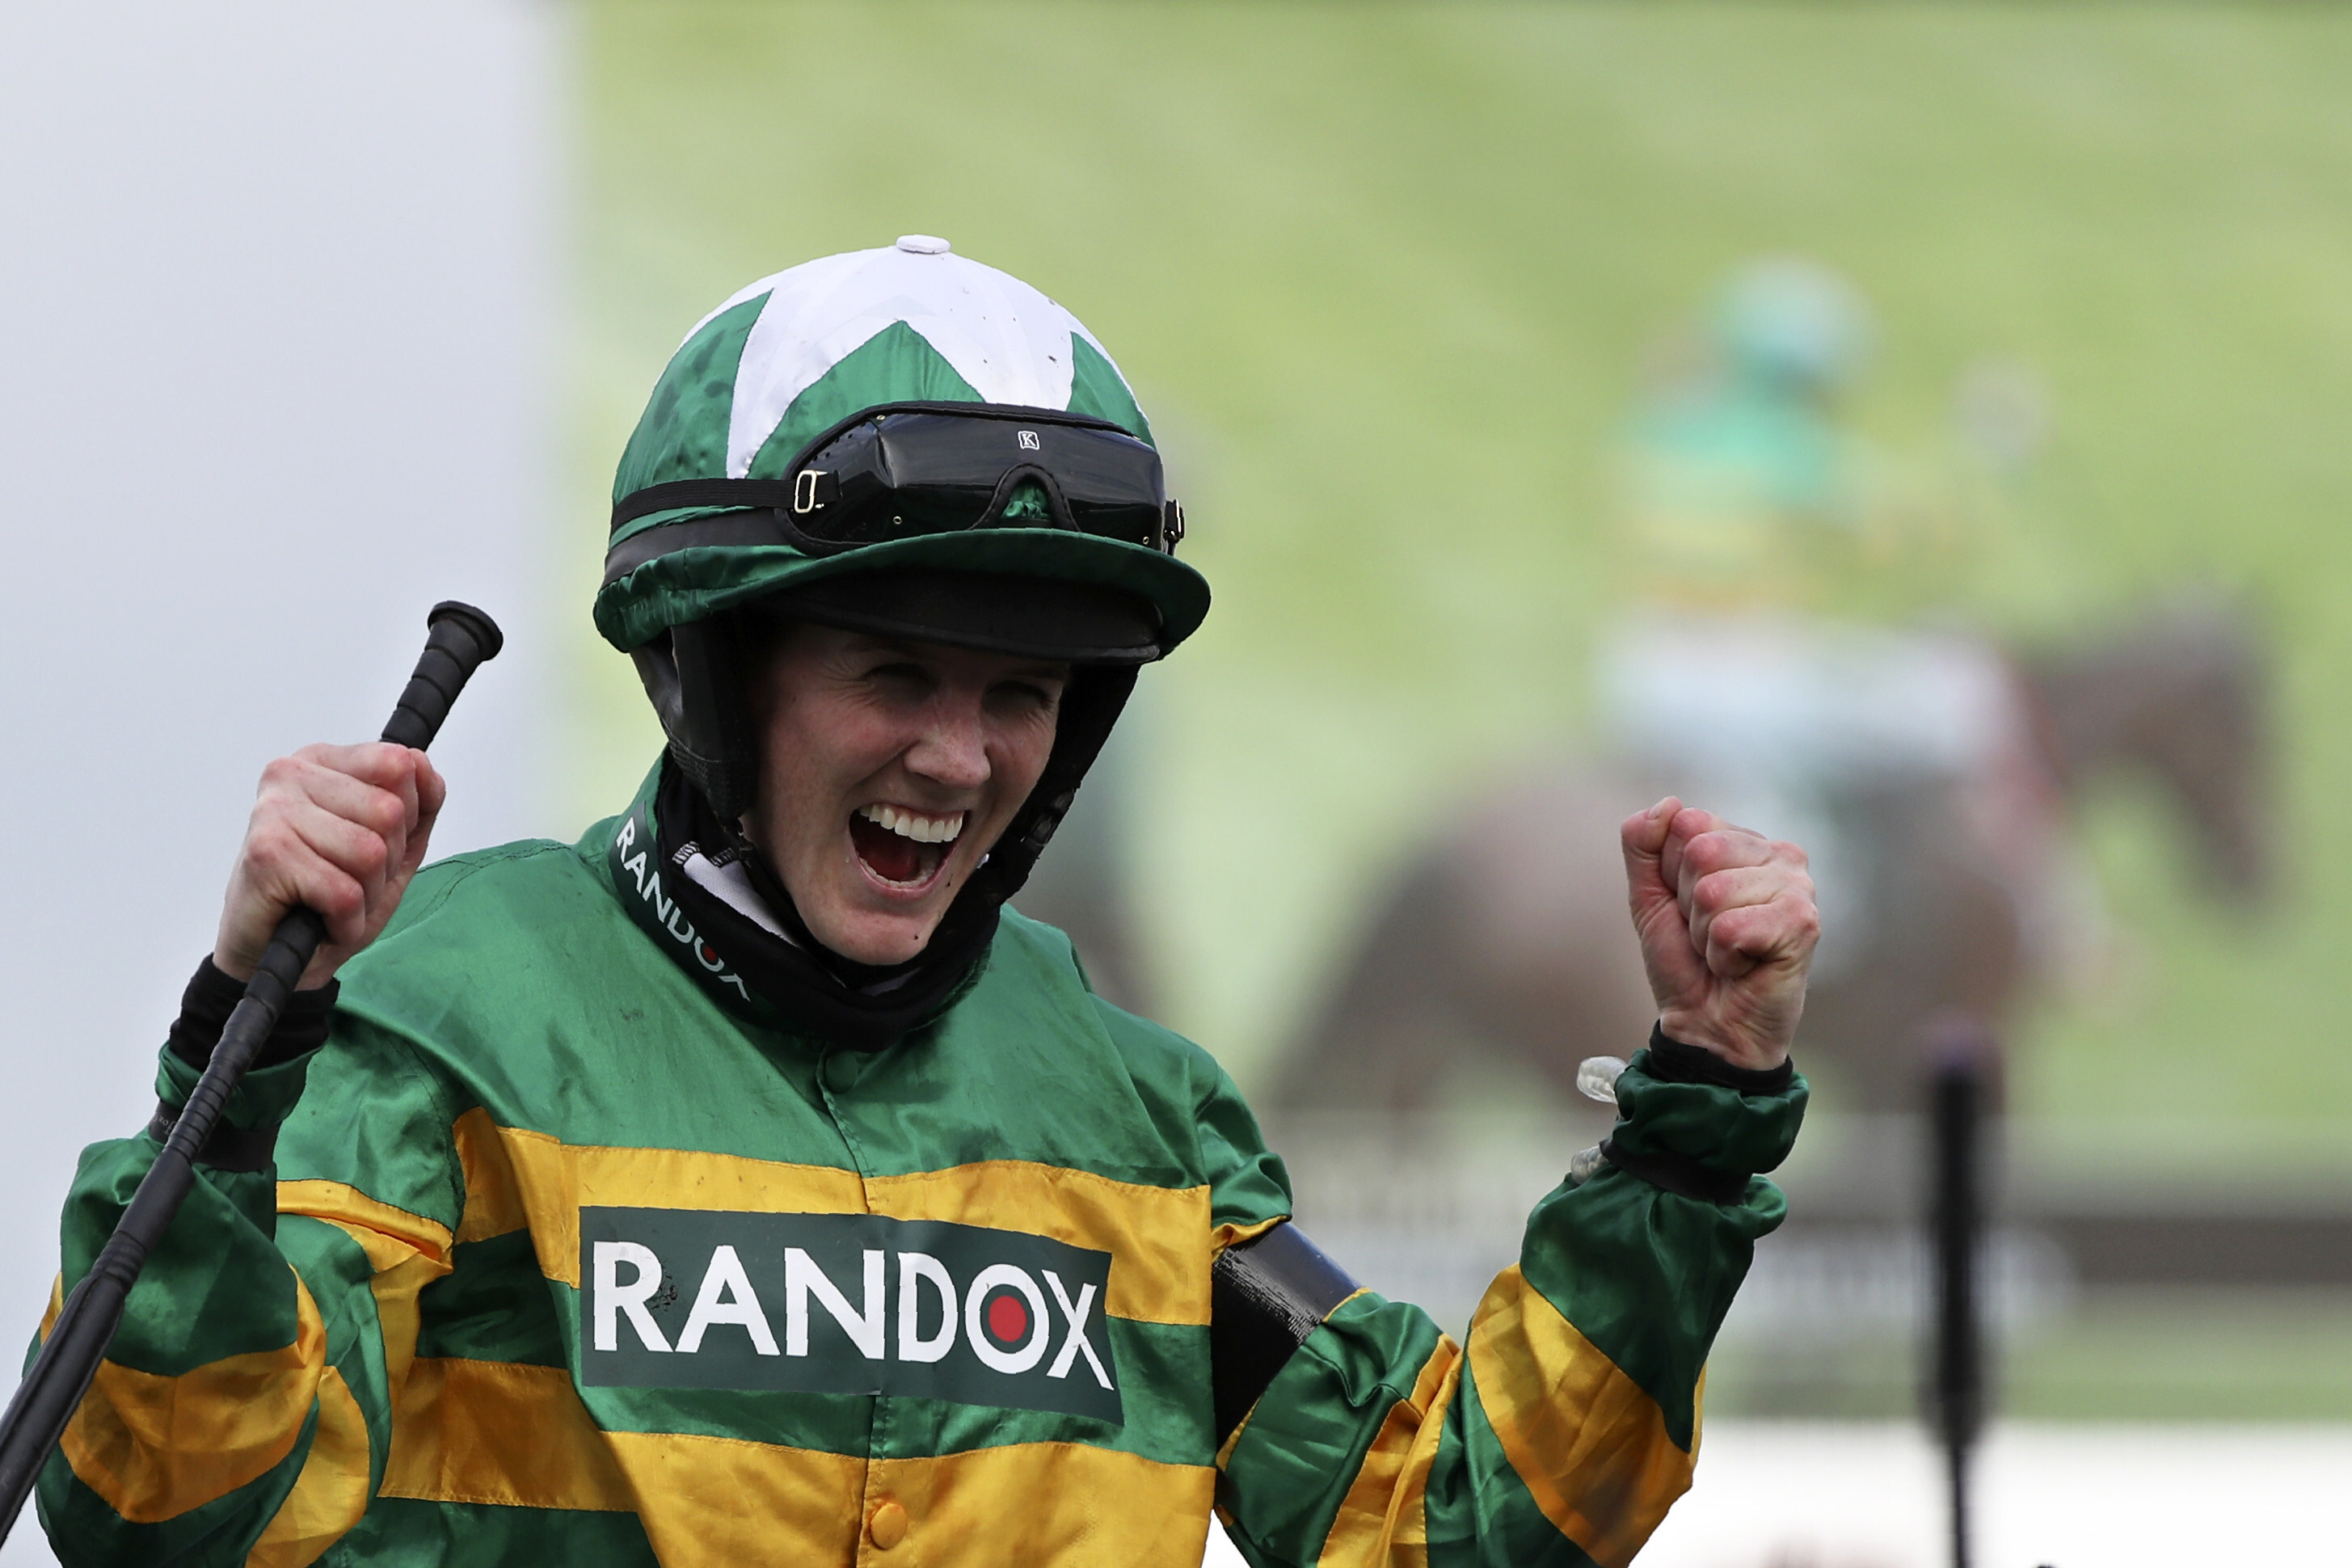 Rachael Blackmore celebrates after winning the Randox Grand National Handicap Chase at Aintree racecourse, near Liverpool, UK on Saturday. Photo: AP